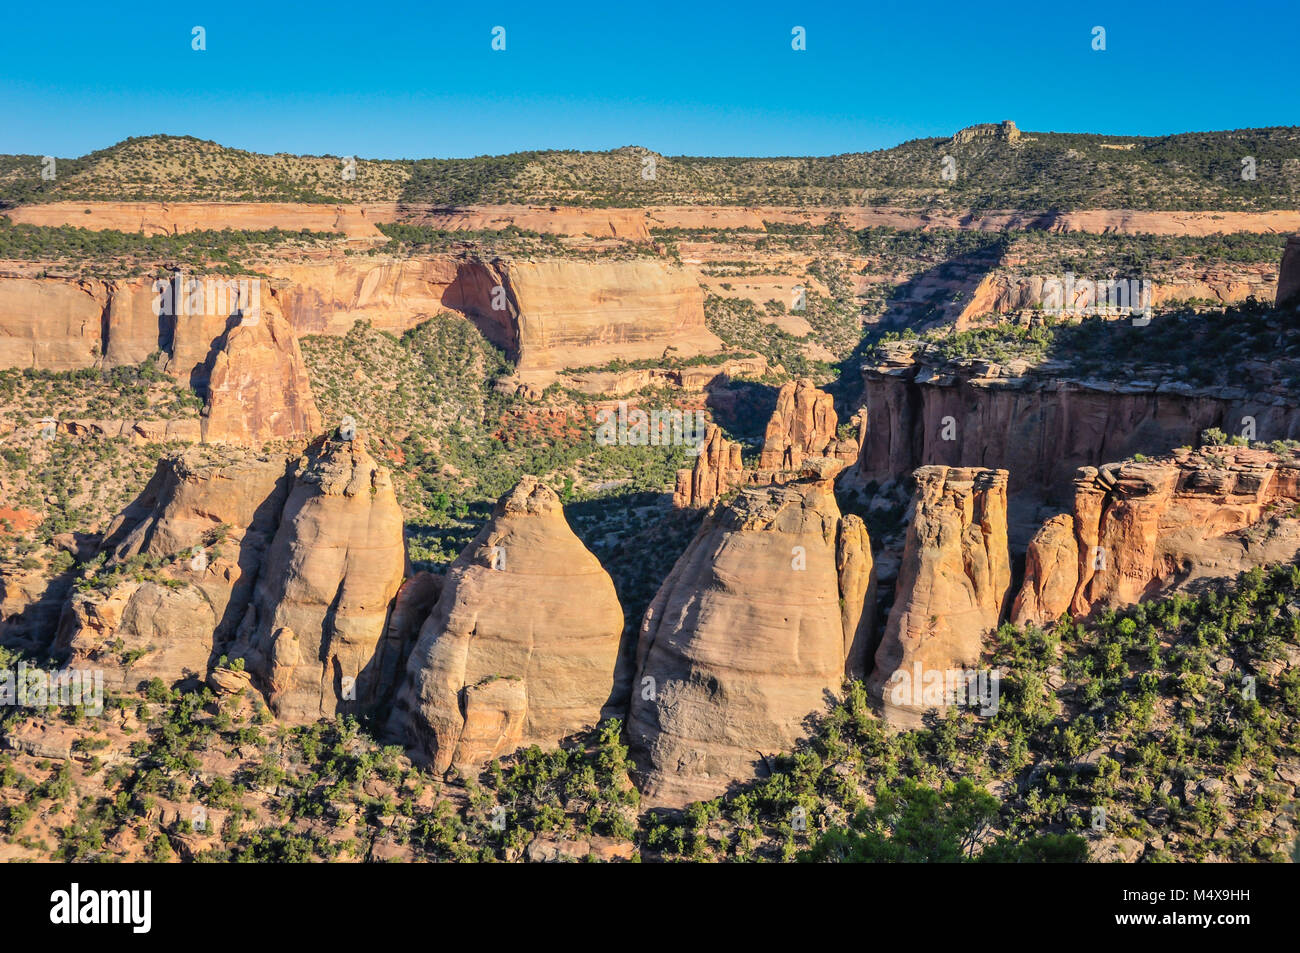 Hoodoos at Colorado National Monument show the effects and shape of erosion. Stock Photo